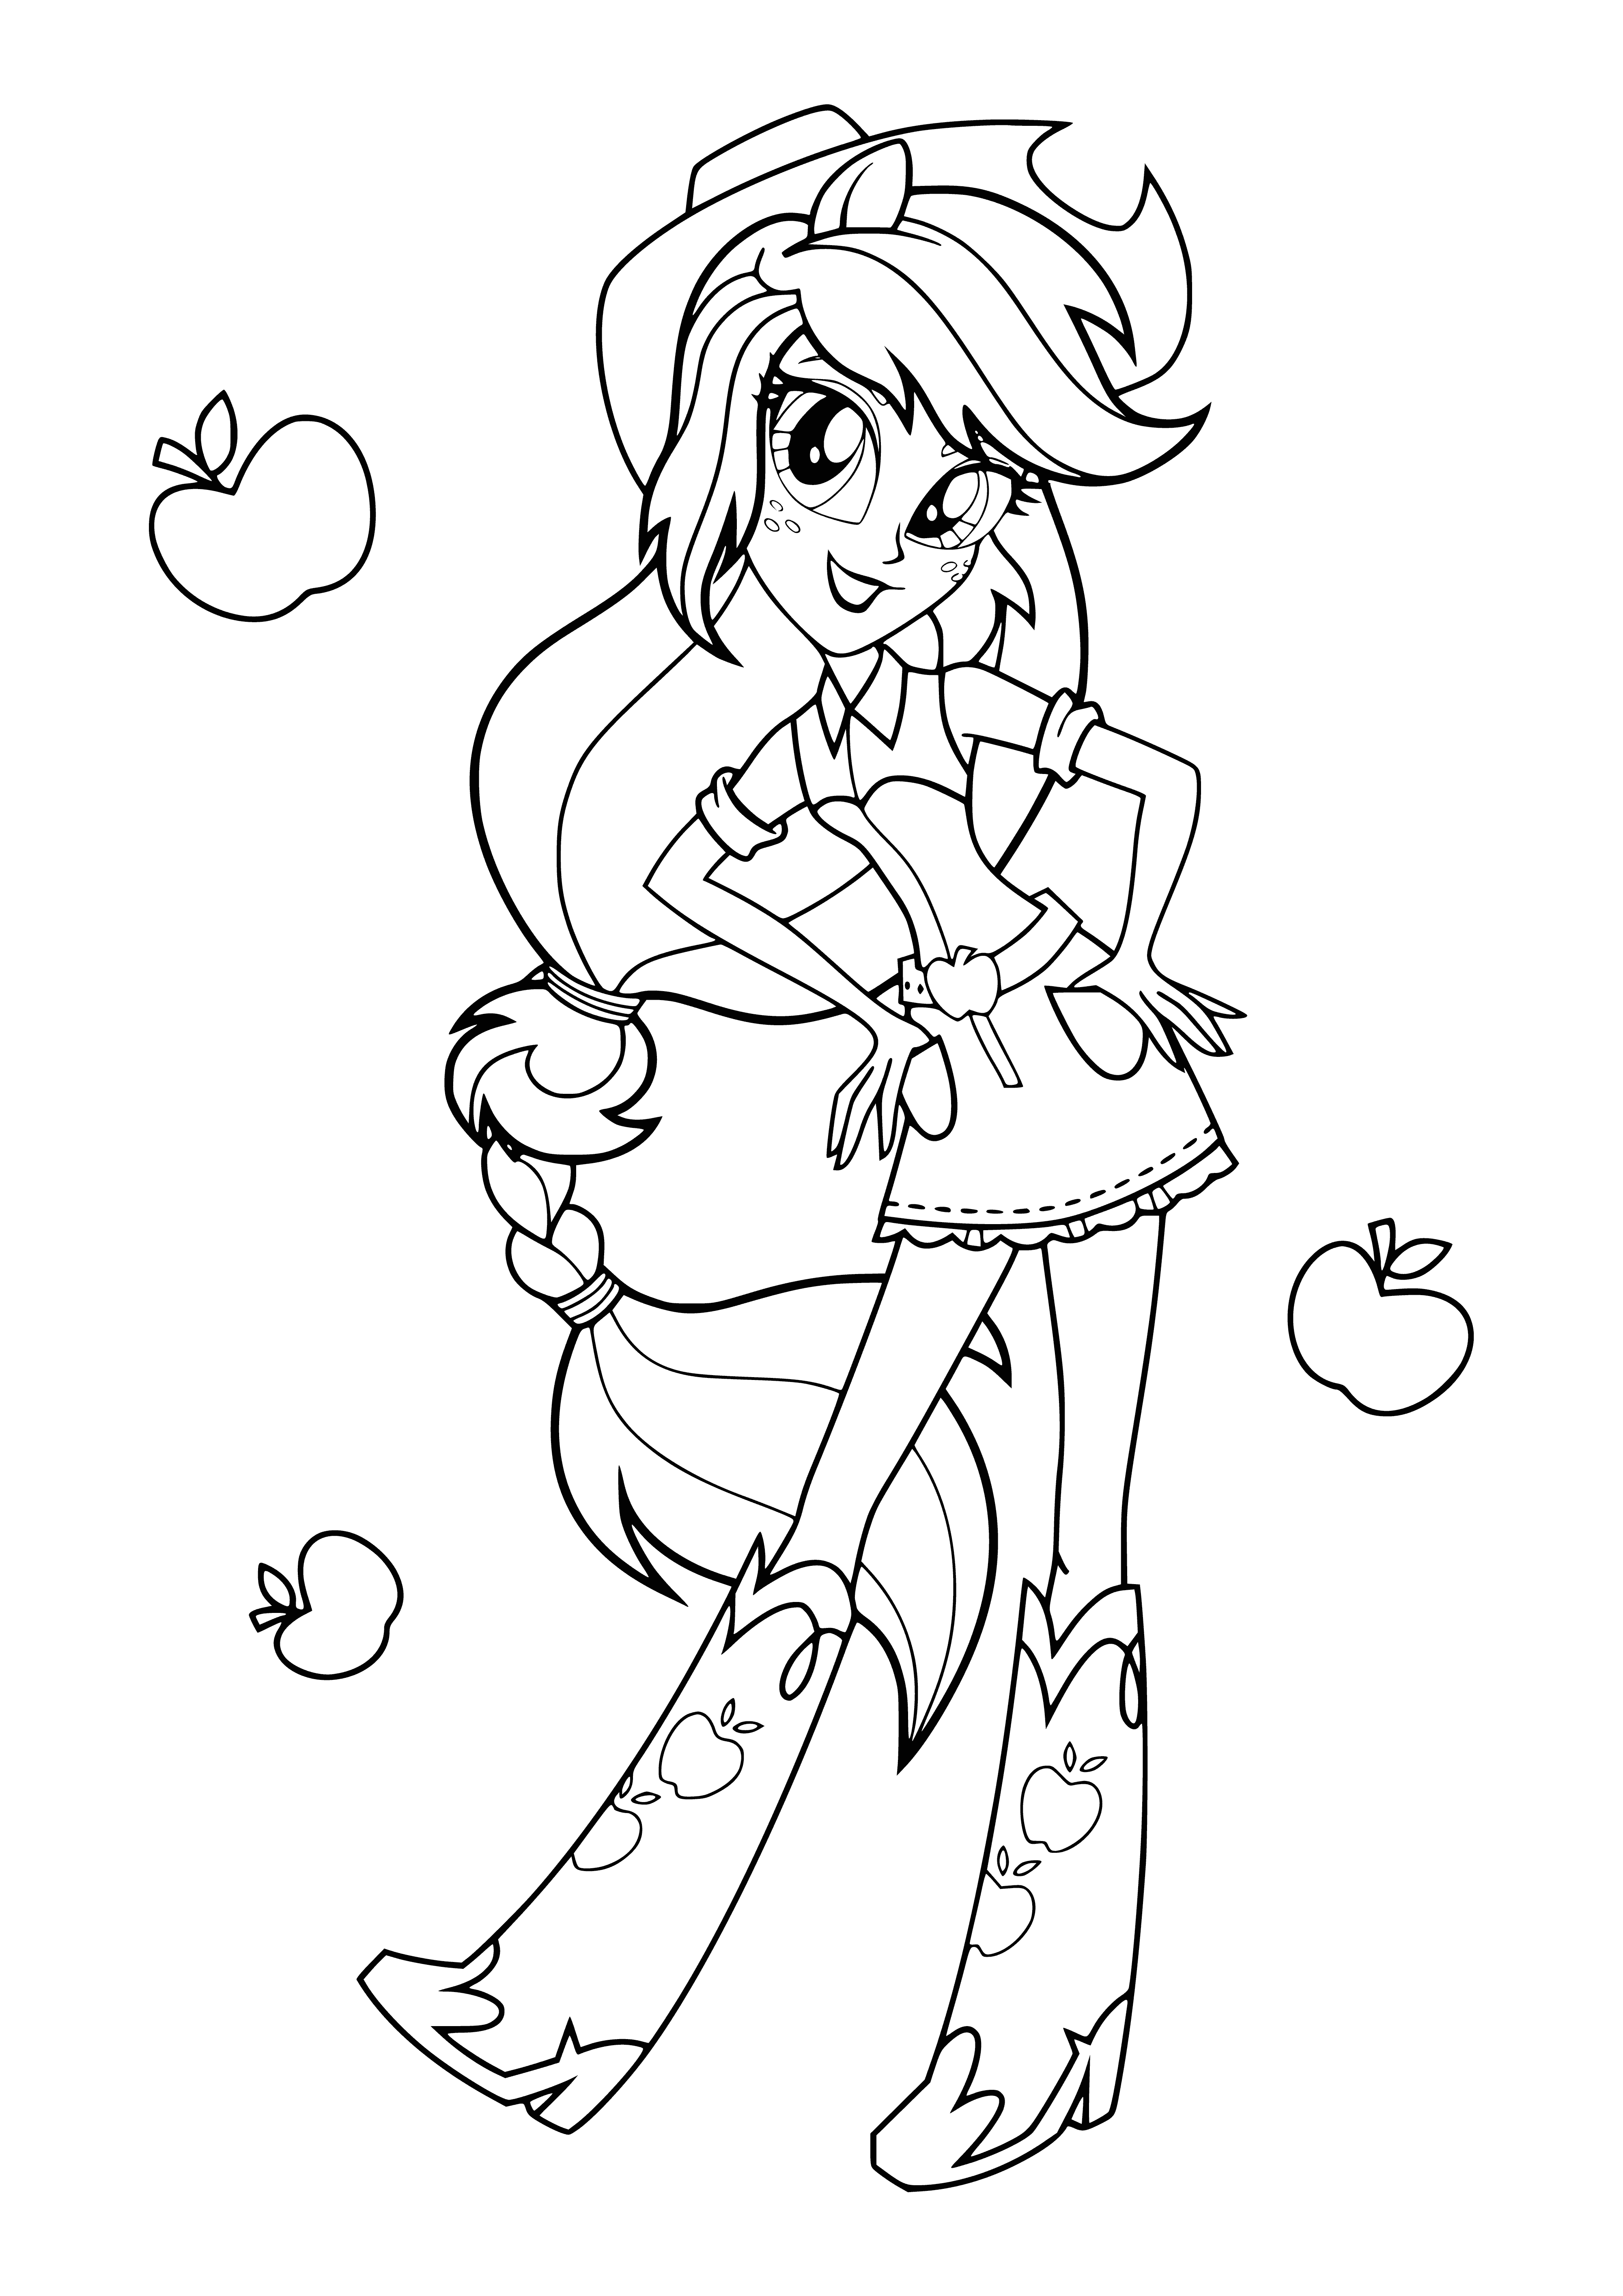 Applejack is a teen w/ blonde ponytail wearing brown vest & white shirt holding a green apple. #cartooncharacter